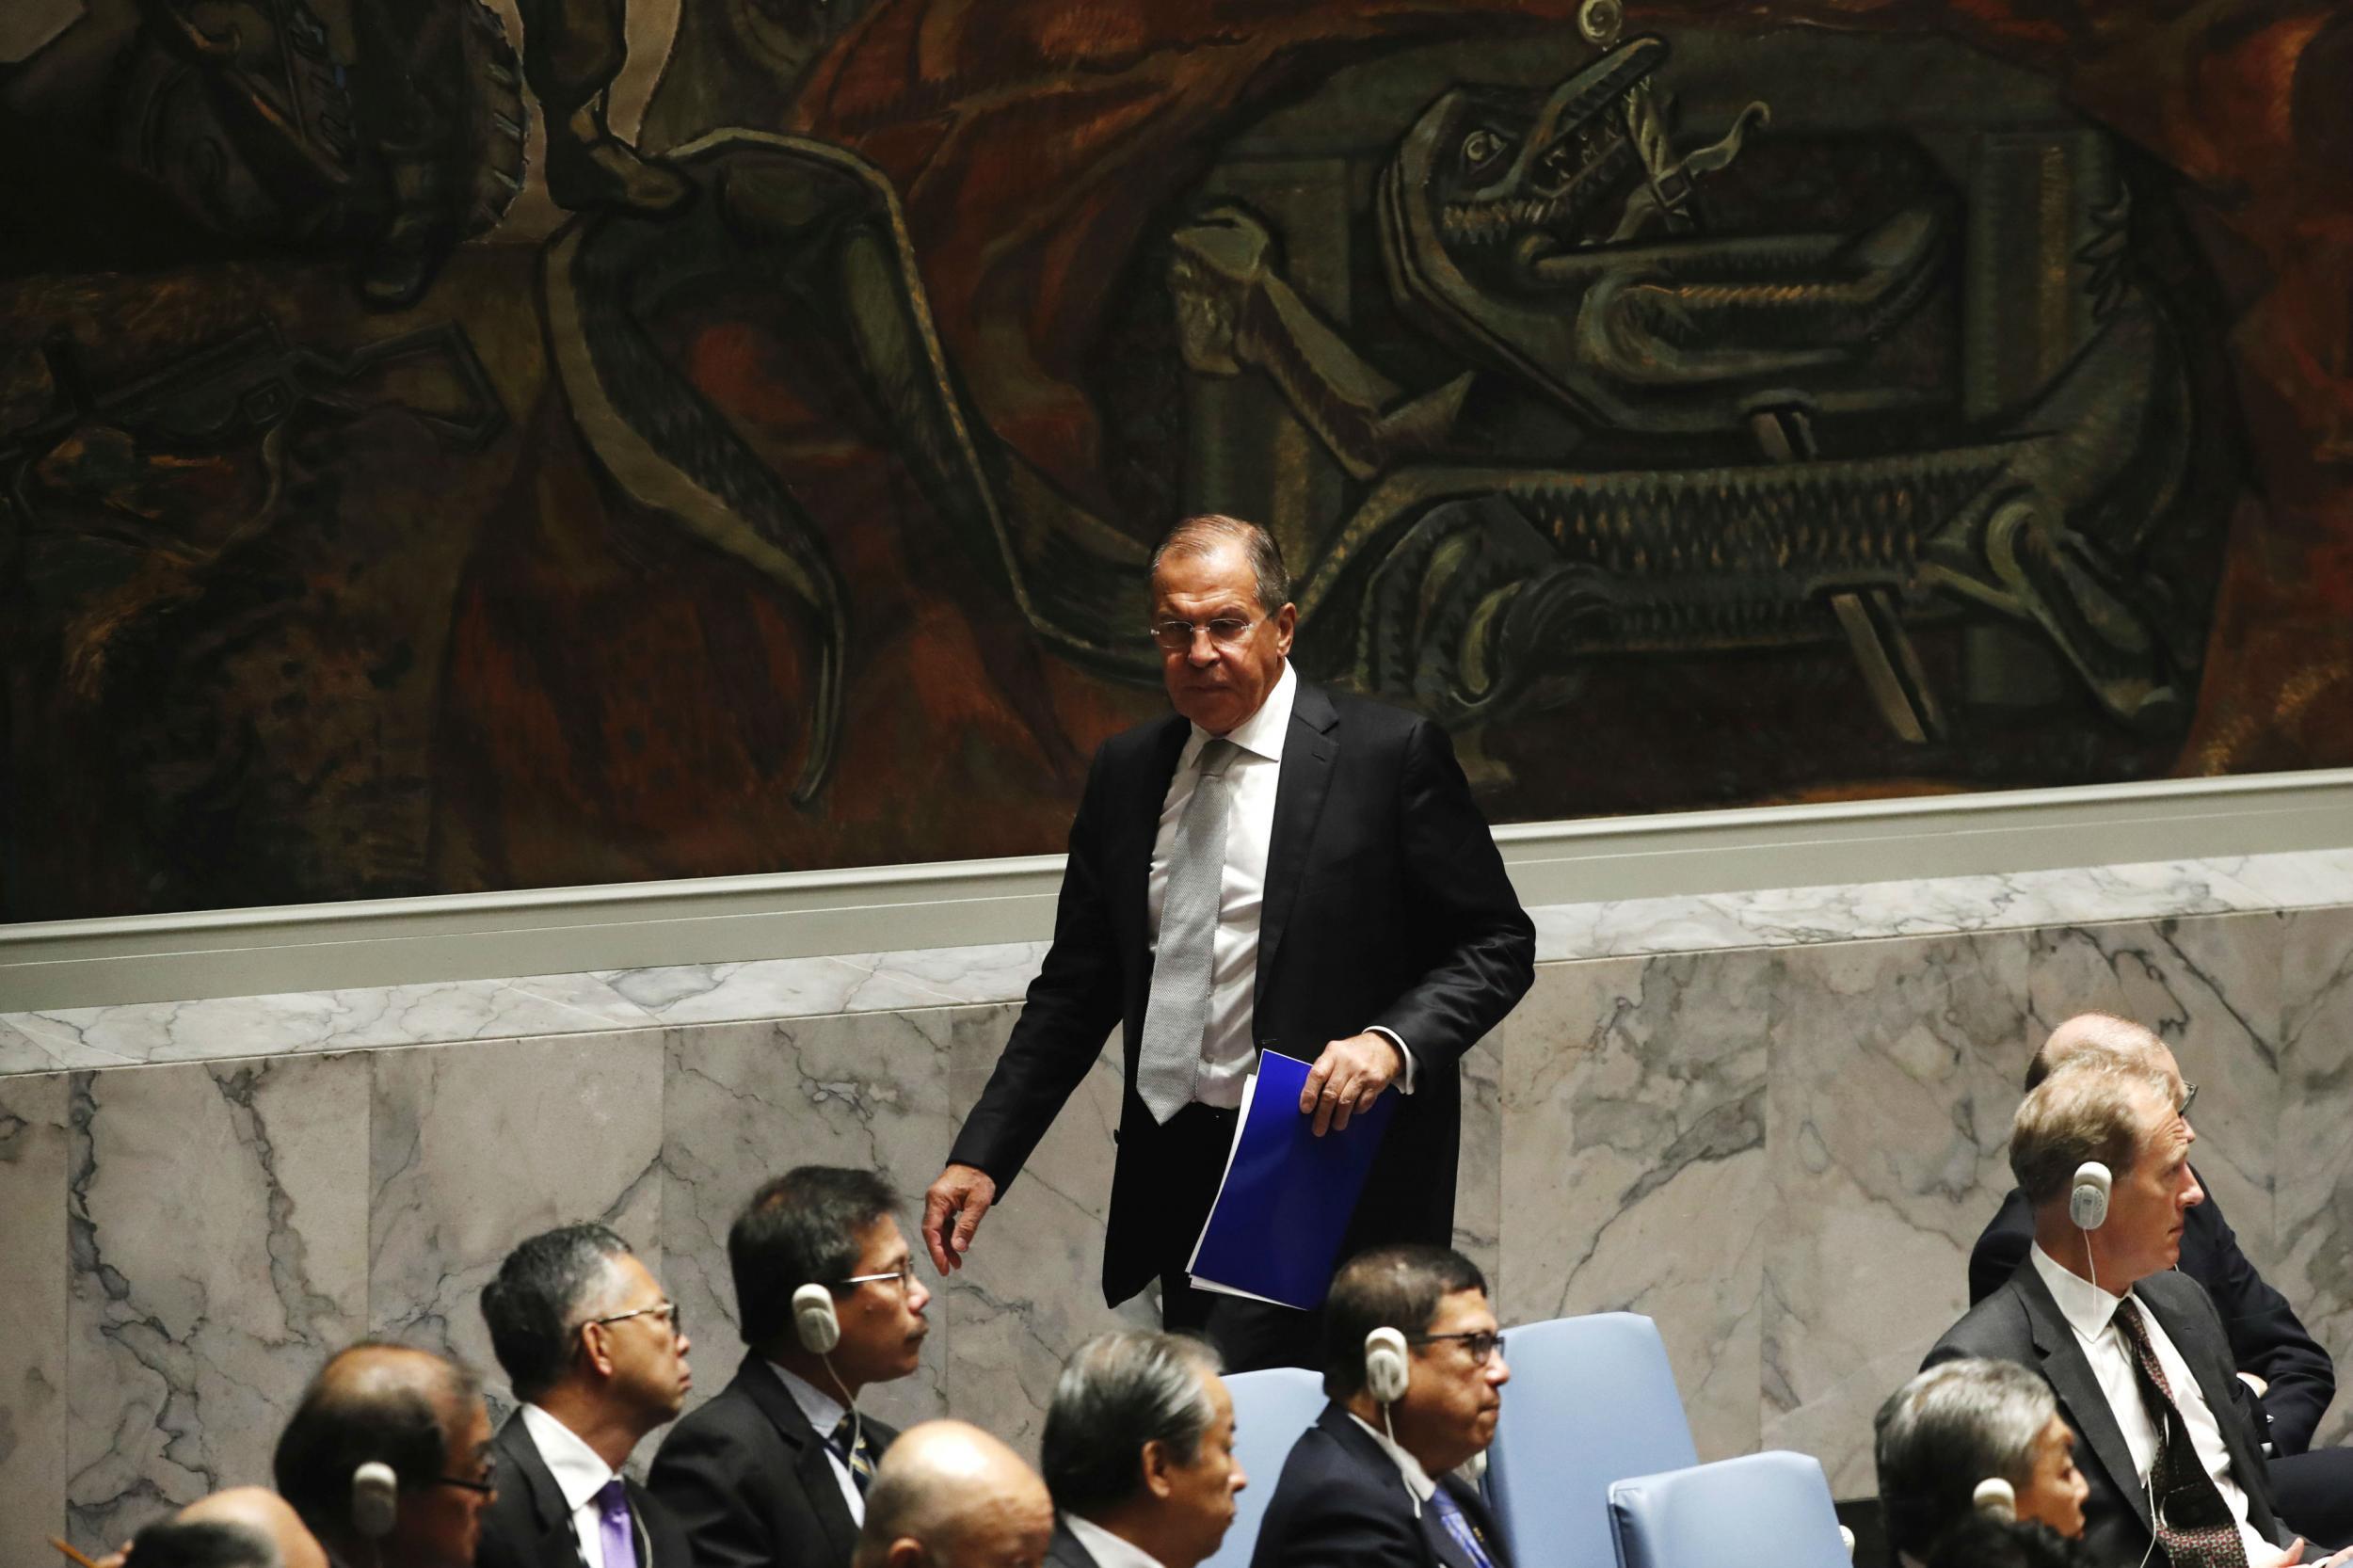 &#13;
Sergey Lavrov leaves the chamber after listening to John Kerry’s comments &#13;